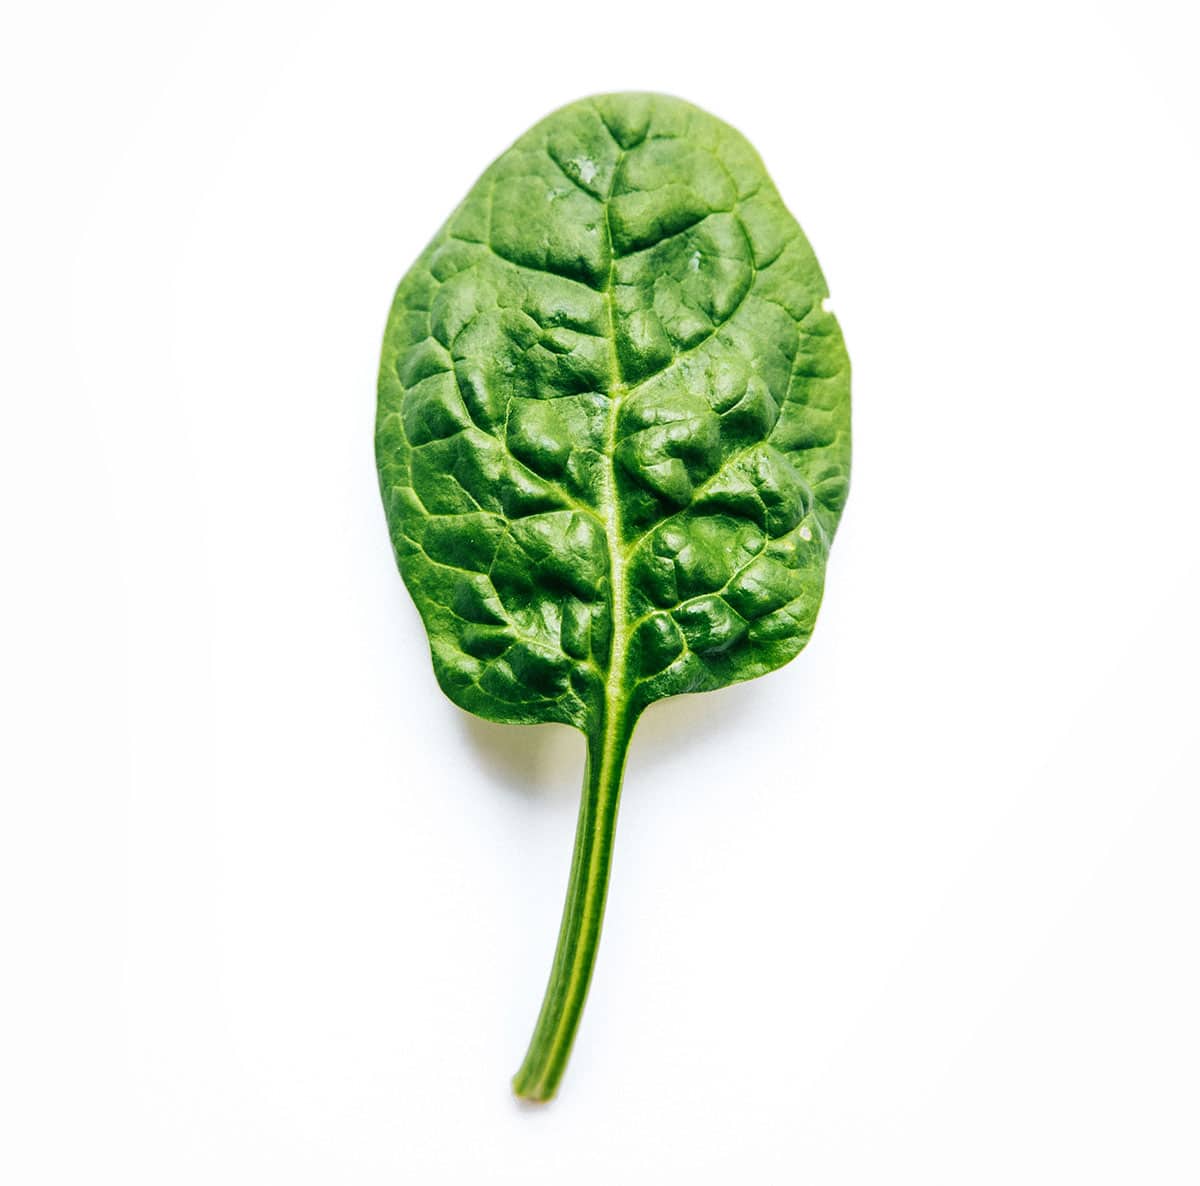 Spinach leaf on a white background.